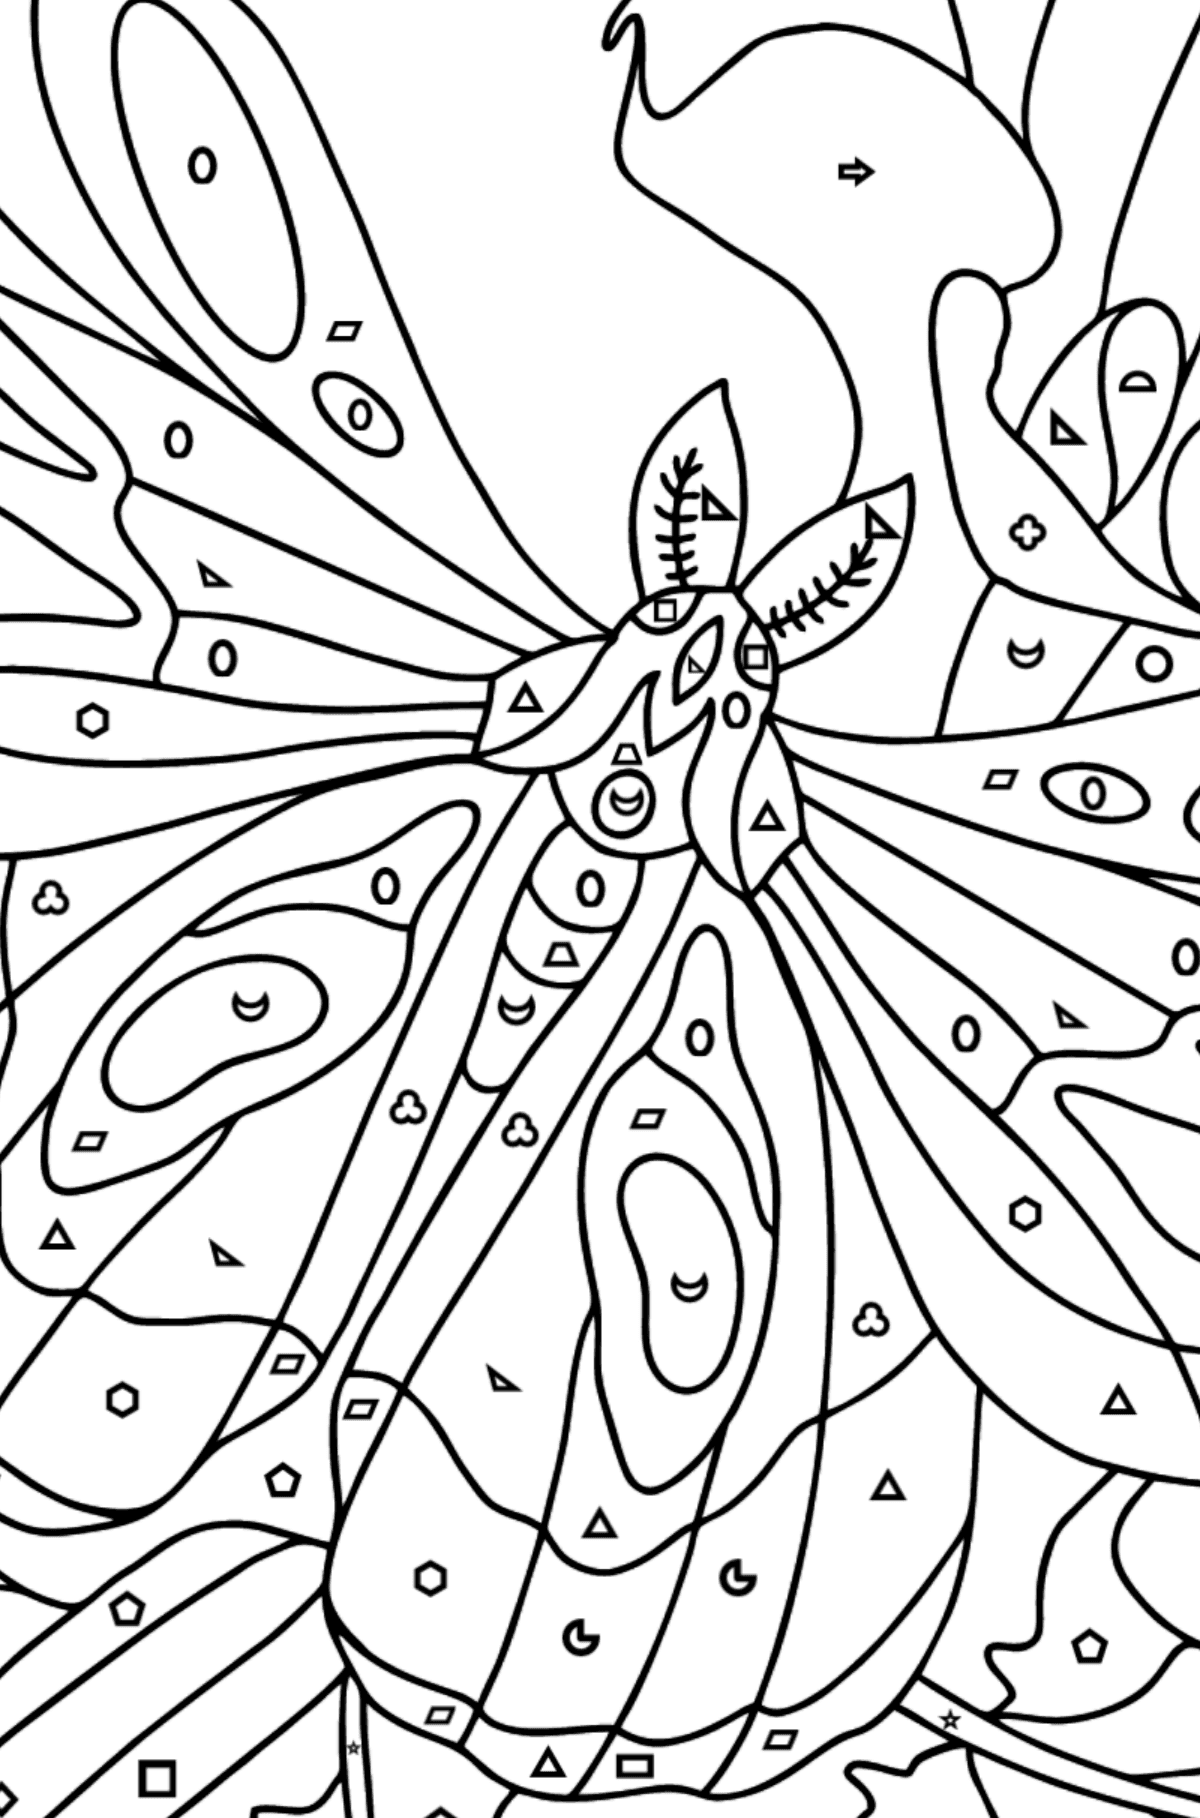 Butterfly on a branch - Insects coloring pages for Adults online